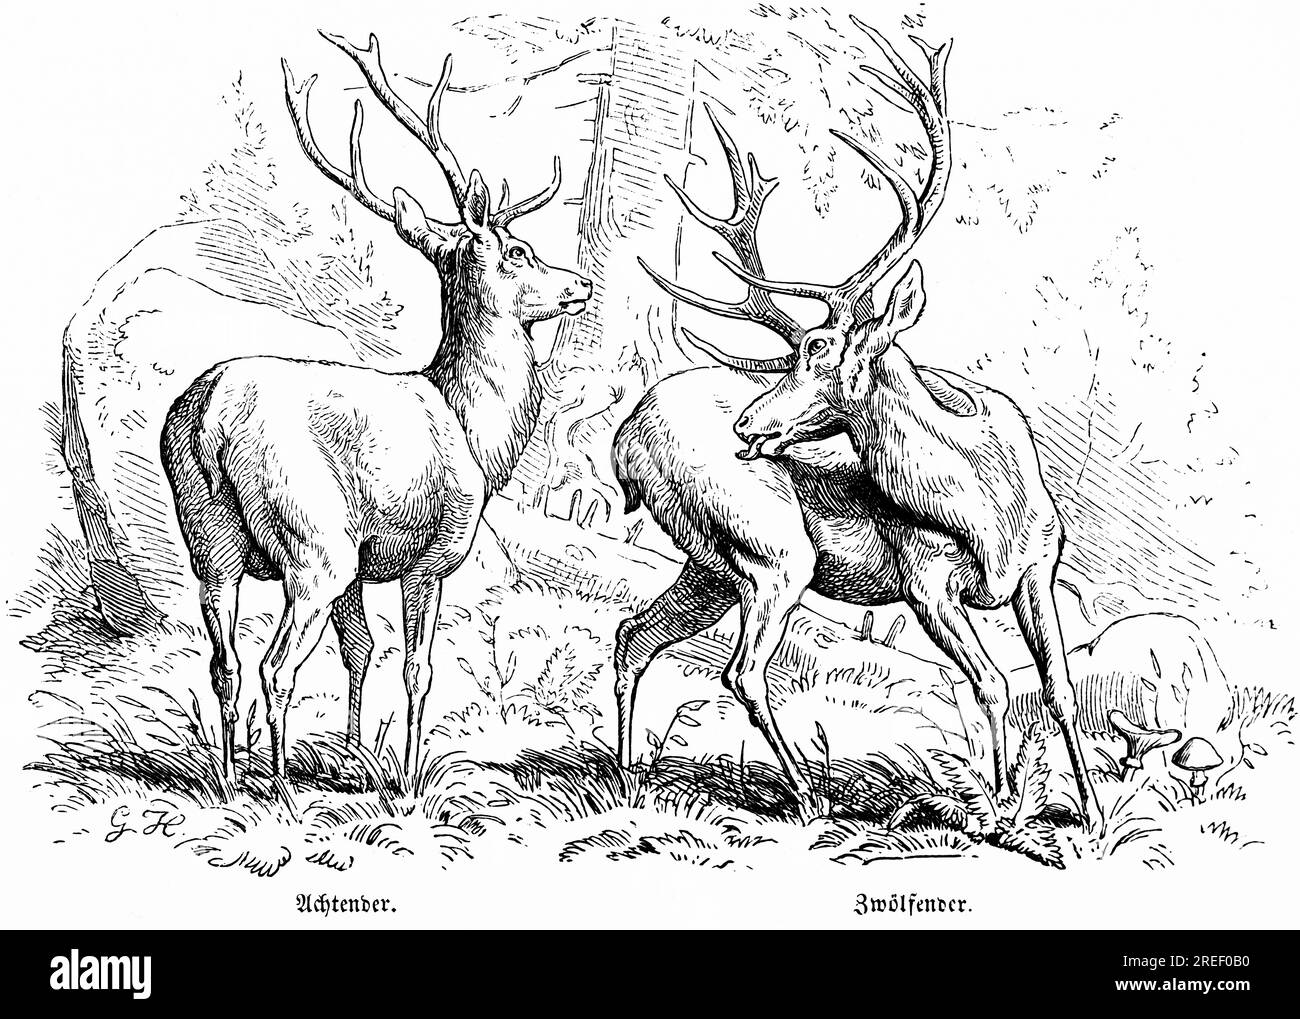 Cerfs, Eights and Twelve in the Forest, Hubertus Hunting, scènes de chasse, animaux sauvages, nature, Lick, Turning the Head, Illustration historique Banque D'Images